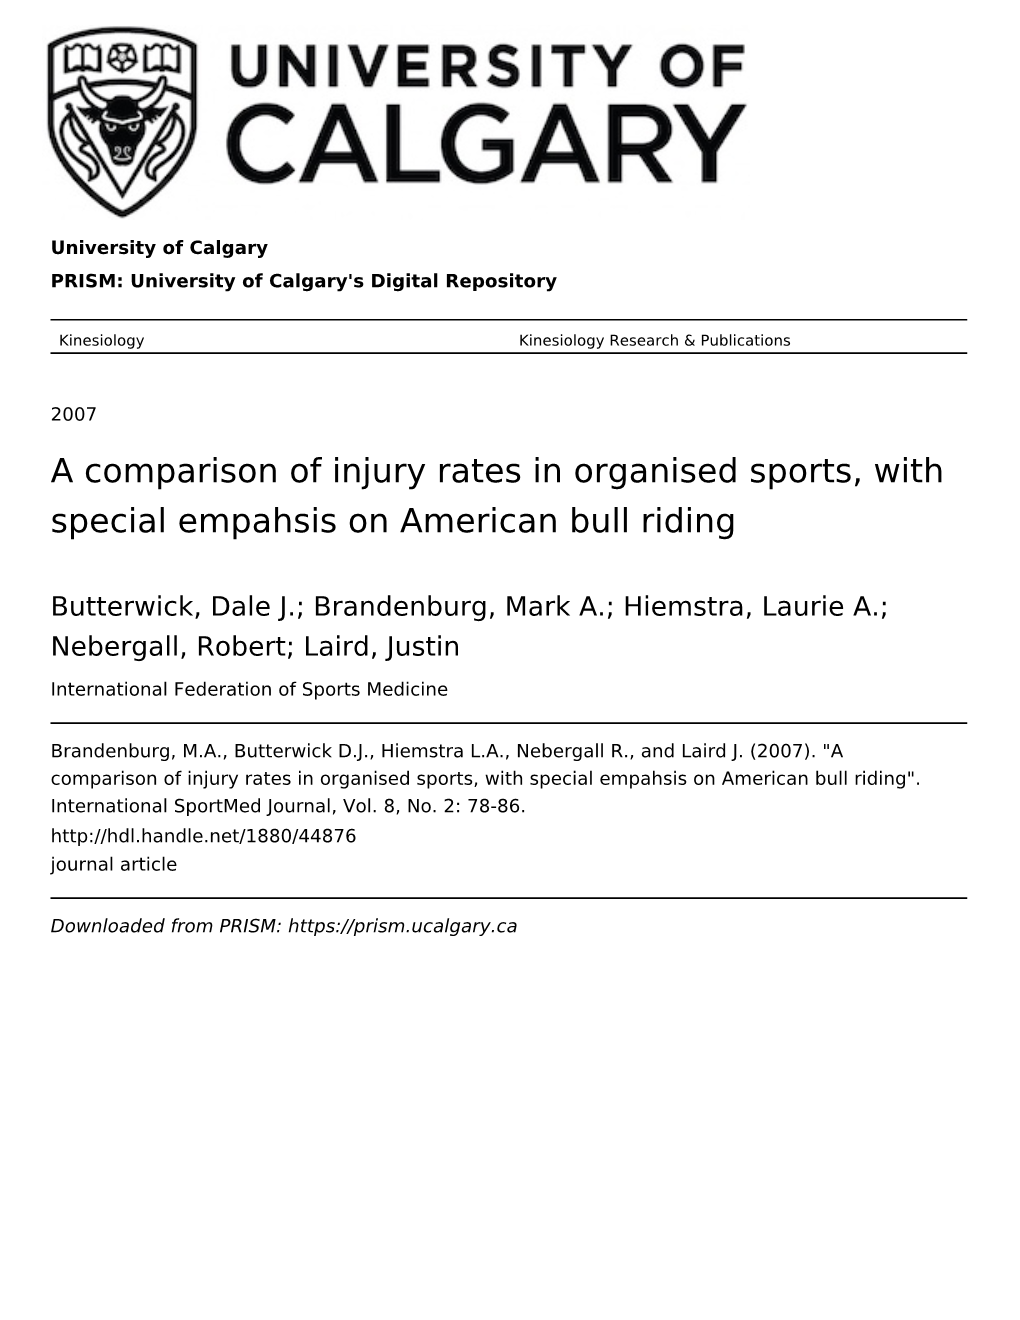 A Comparison of Injury Rates in Organised Sports, with Special Empahsis on American Bull Riding